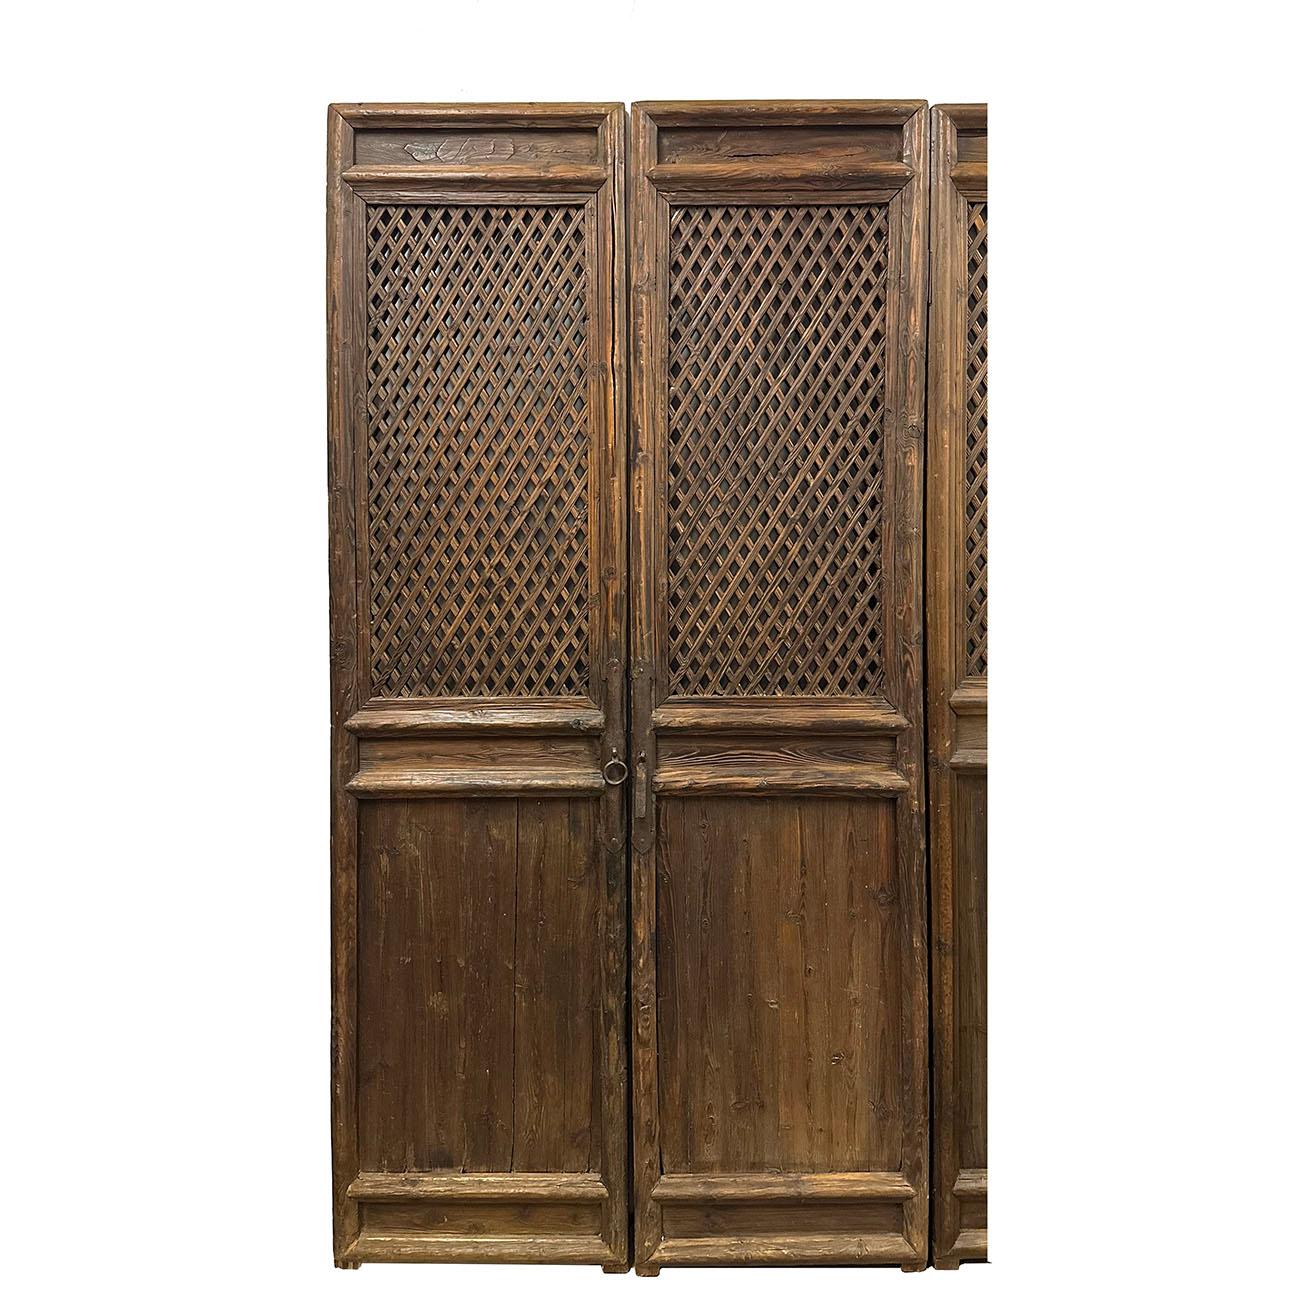 A set of four Chinese Qing Dynasty period large carved elm wood interior door panels from the late 19th century, with fretwork design, Created in China during the Qing Dynasty in the later years of the 19th century, each of this set of four of large